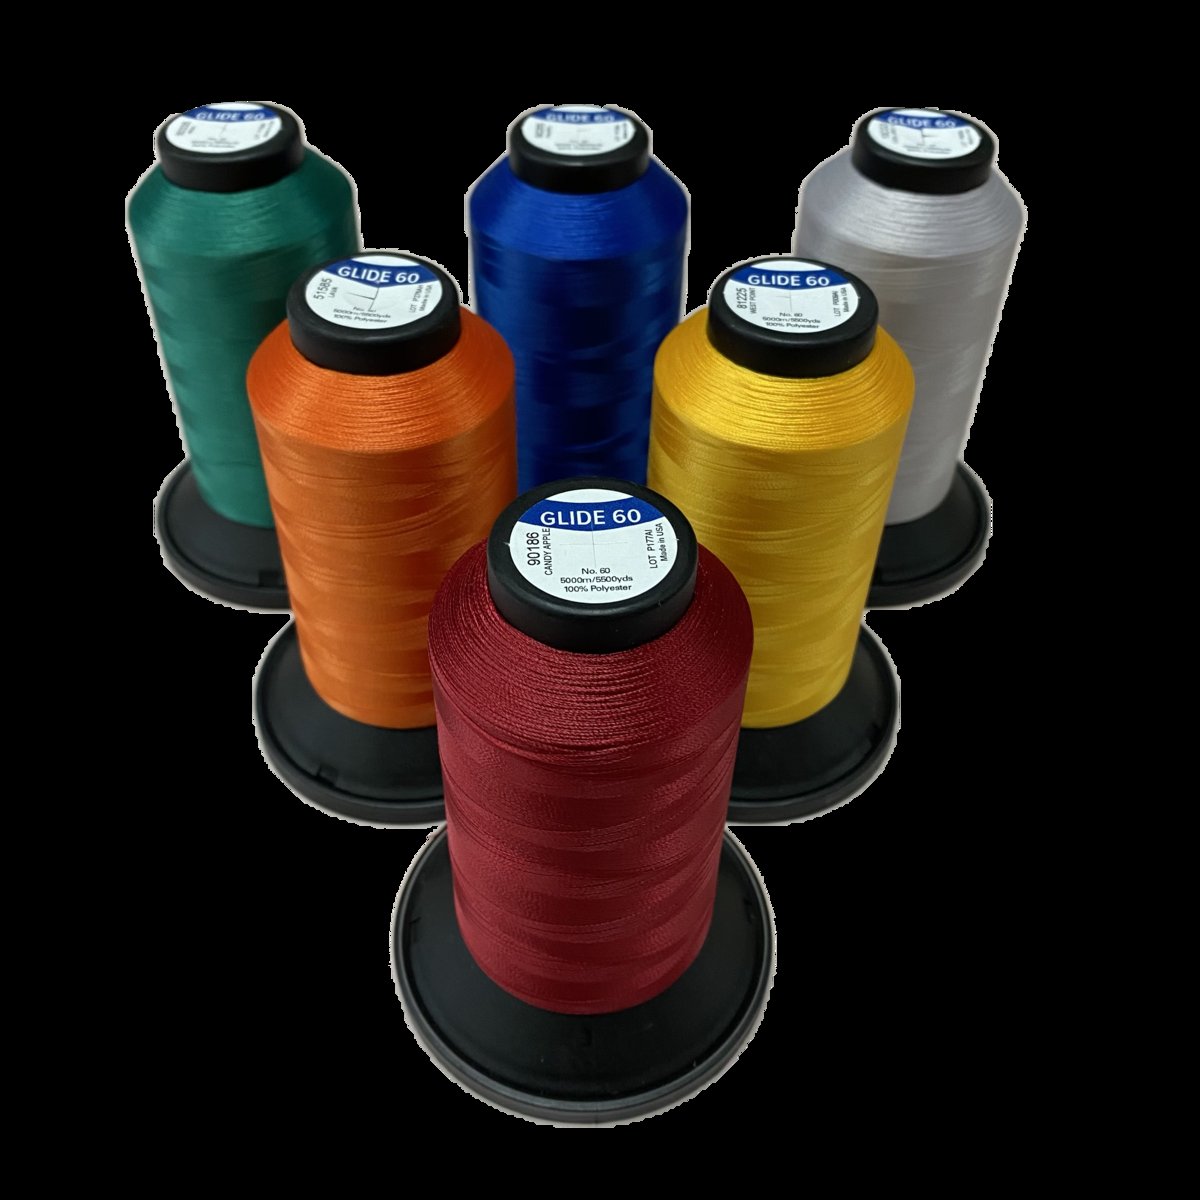 40wt Polyester The Spring Collection Glide Thread Kit